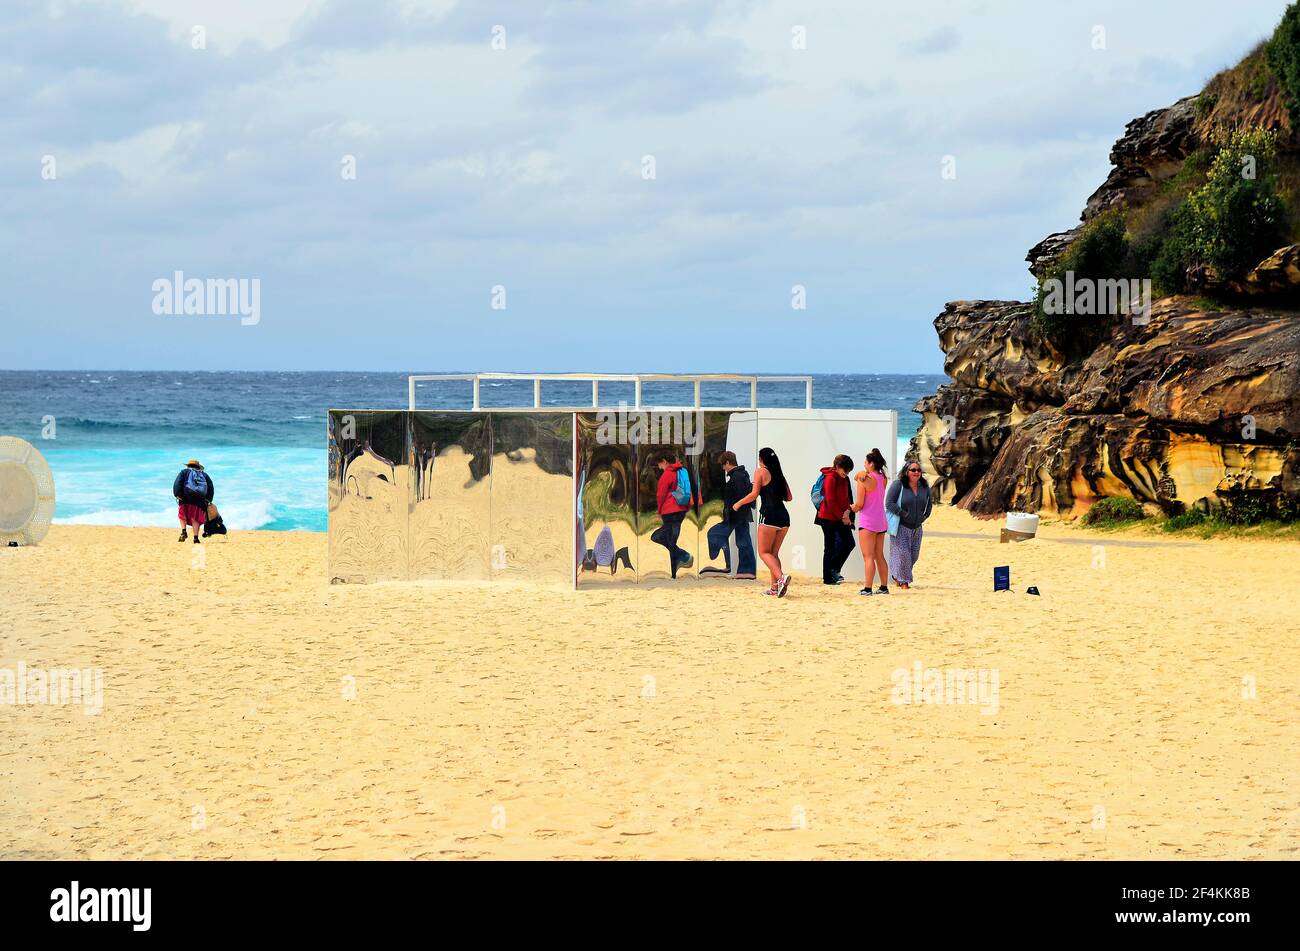 Sydney, NSW, Australia - October 31,2017: Unidentified people on beach of Tamarama by outdoor exhibition Sculpture by the Sea, artwork Temple from Iso Stock Photo